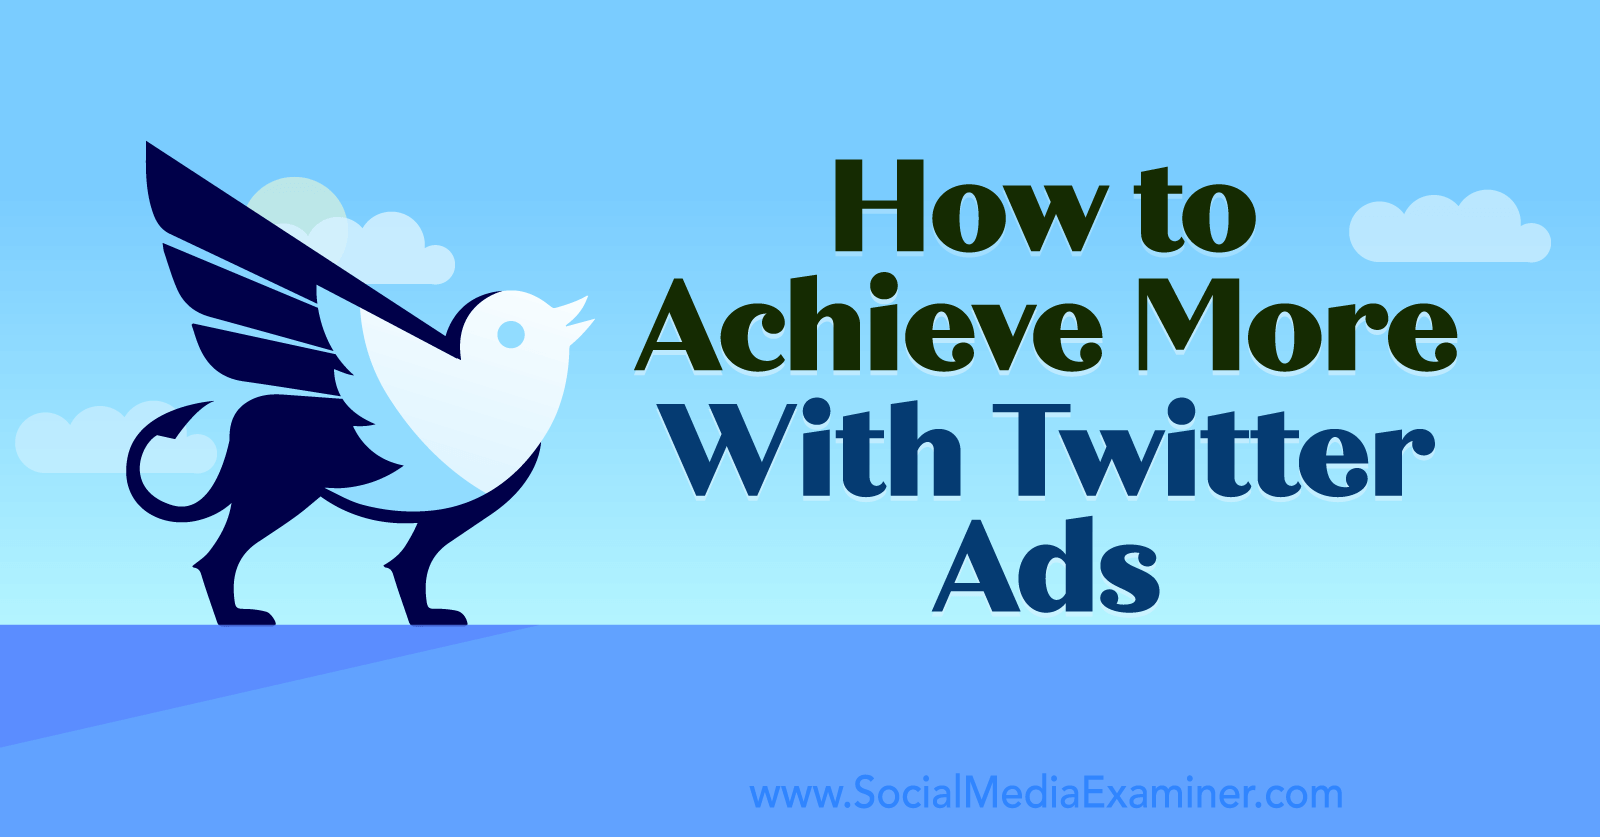 How to Achieve More With Twitter Ads by Anna Sonnenberg on Social Media Examiner.